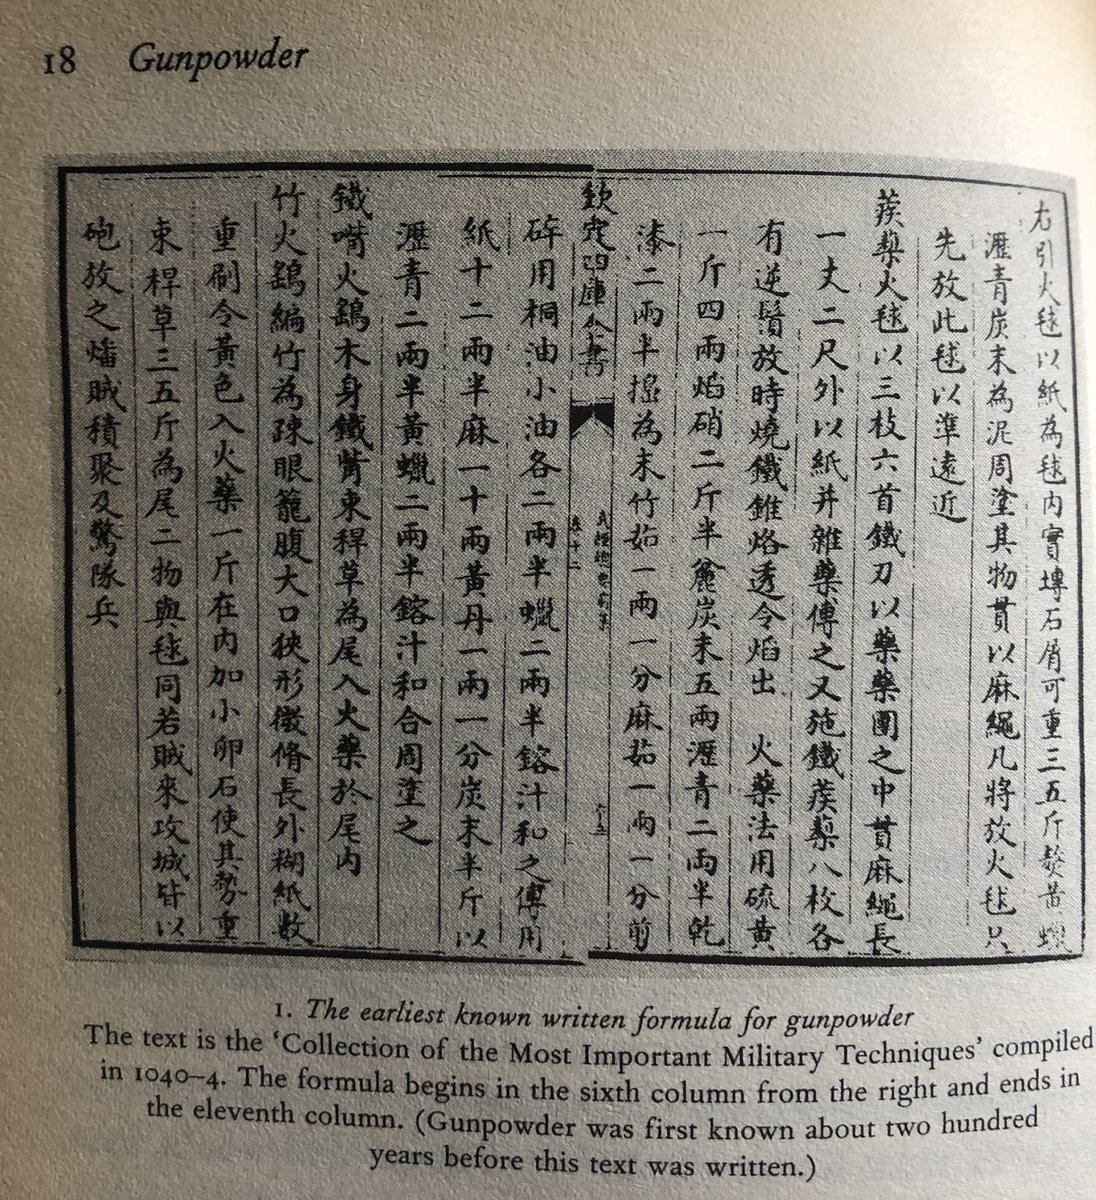 In terms of empirical evidence documenting the formulation of gunpowder, the Chinese compilation, “Collection of the Most Important Military Techniques” is available from 1040.Note: this is not merely a reference to use of gunpowder but the oldest discovered formula for it.